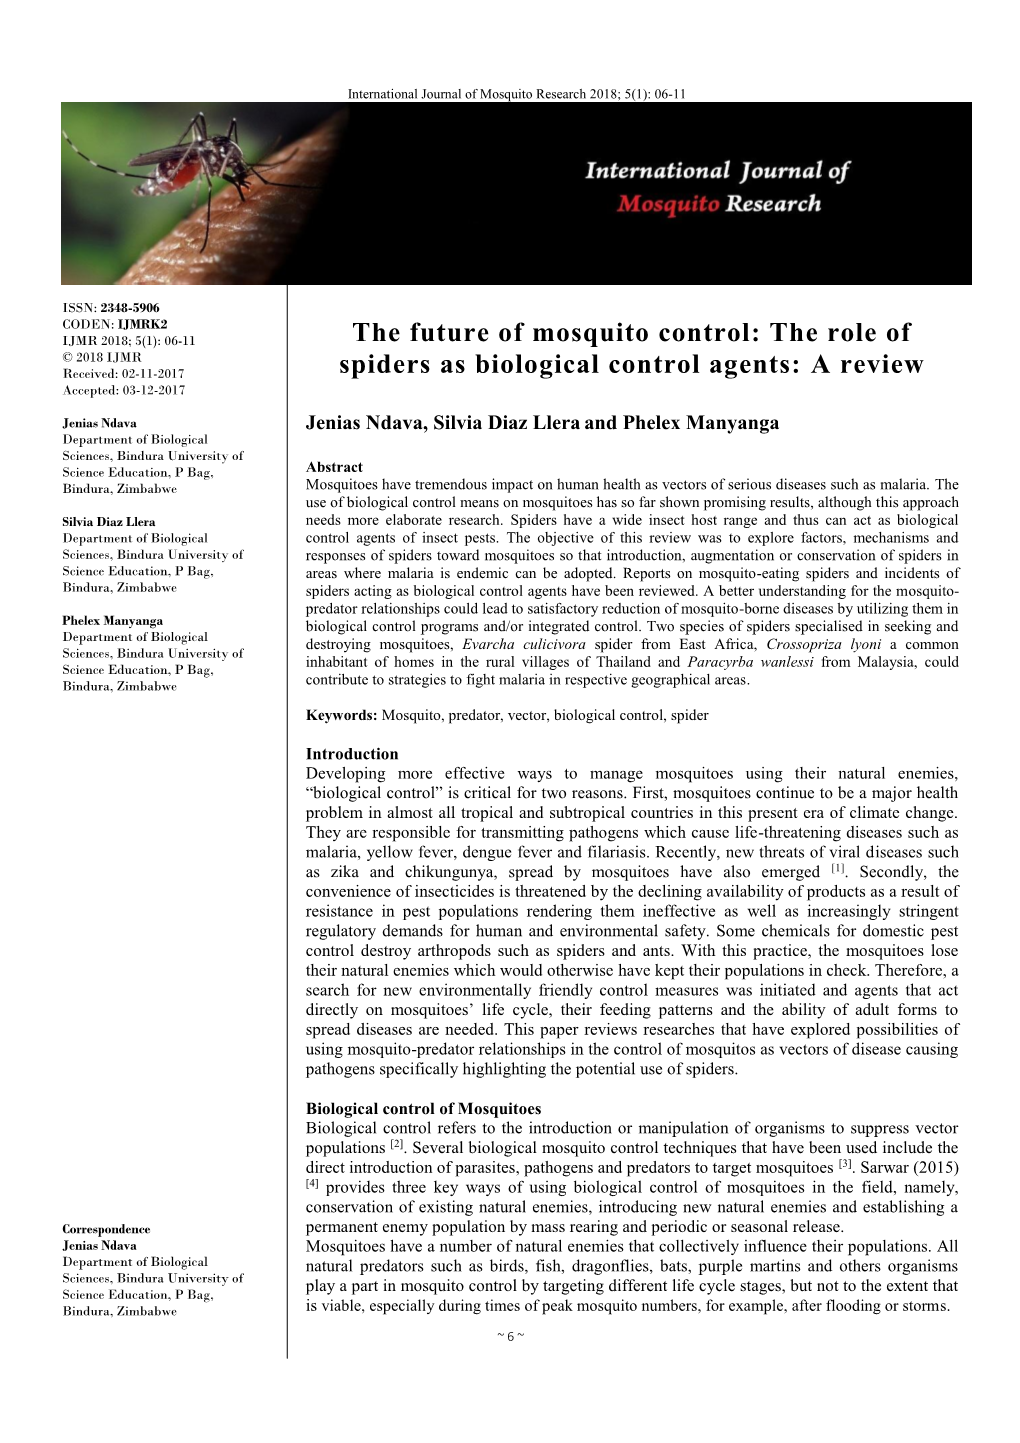 The Role of Spiders As Biological Control Agents: a Review